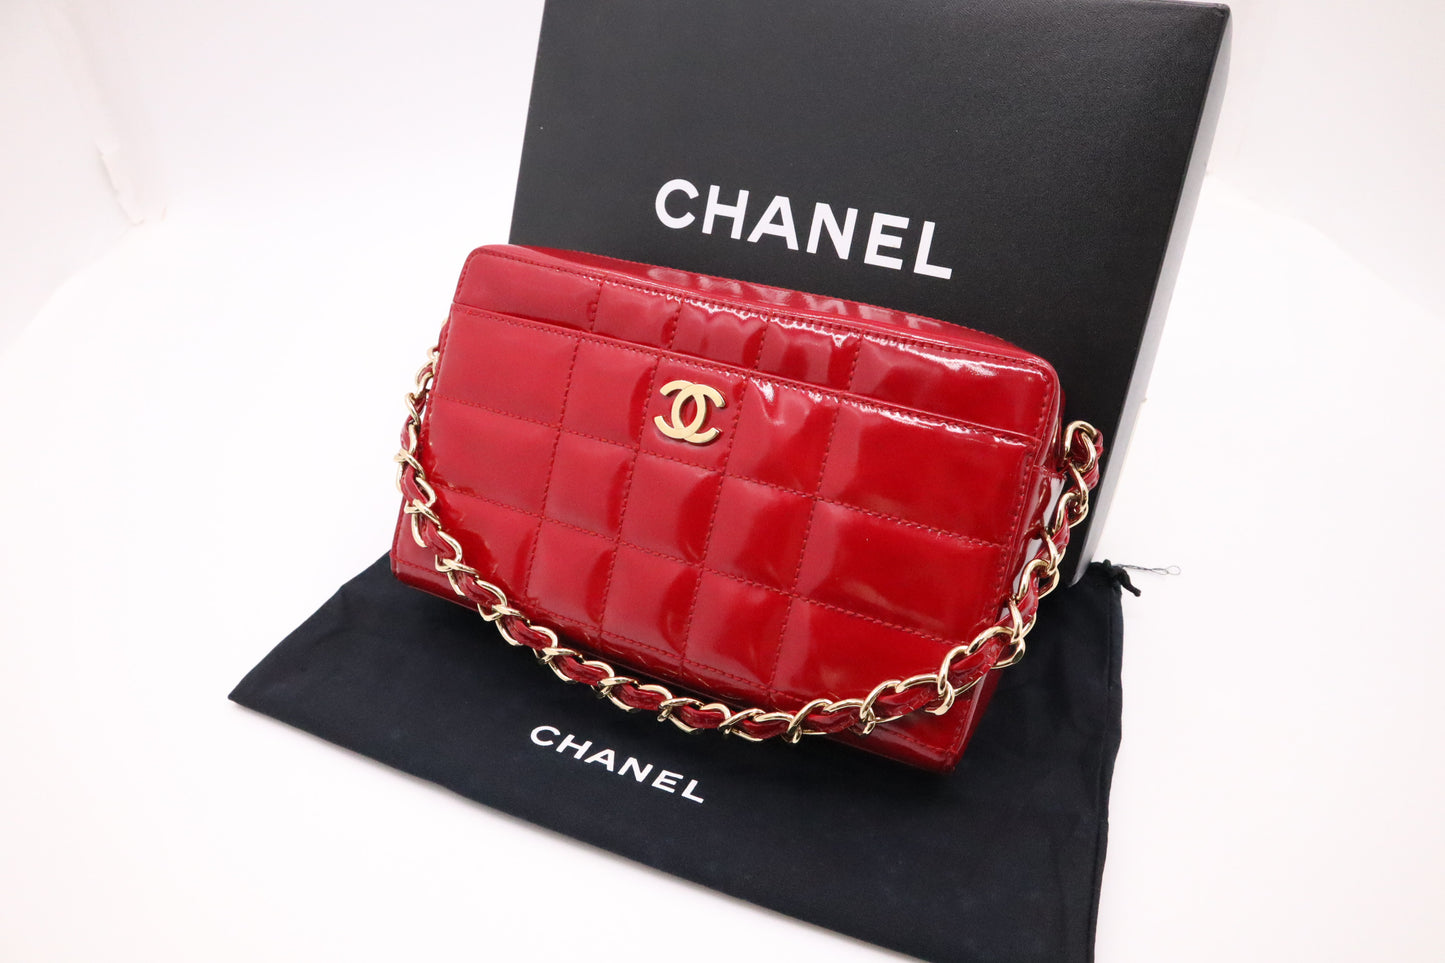 Chanel Camera Bag in Red Patent Leather